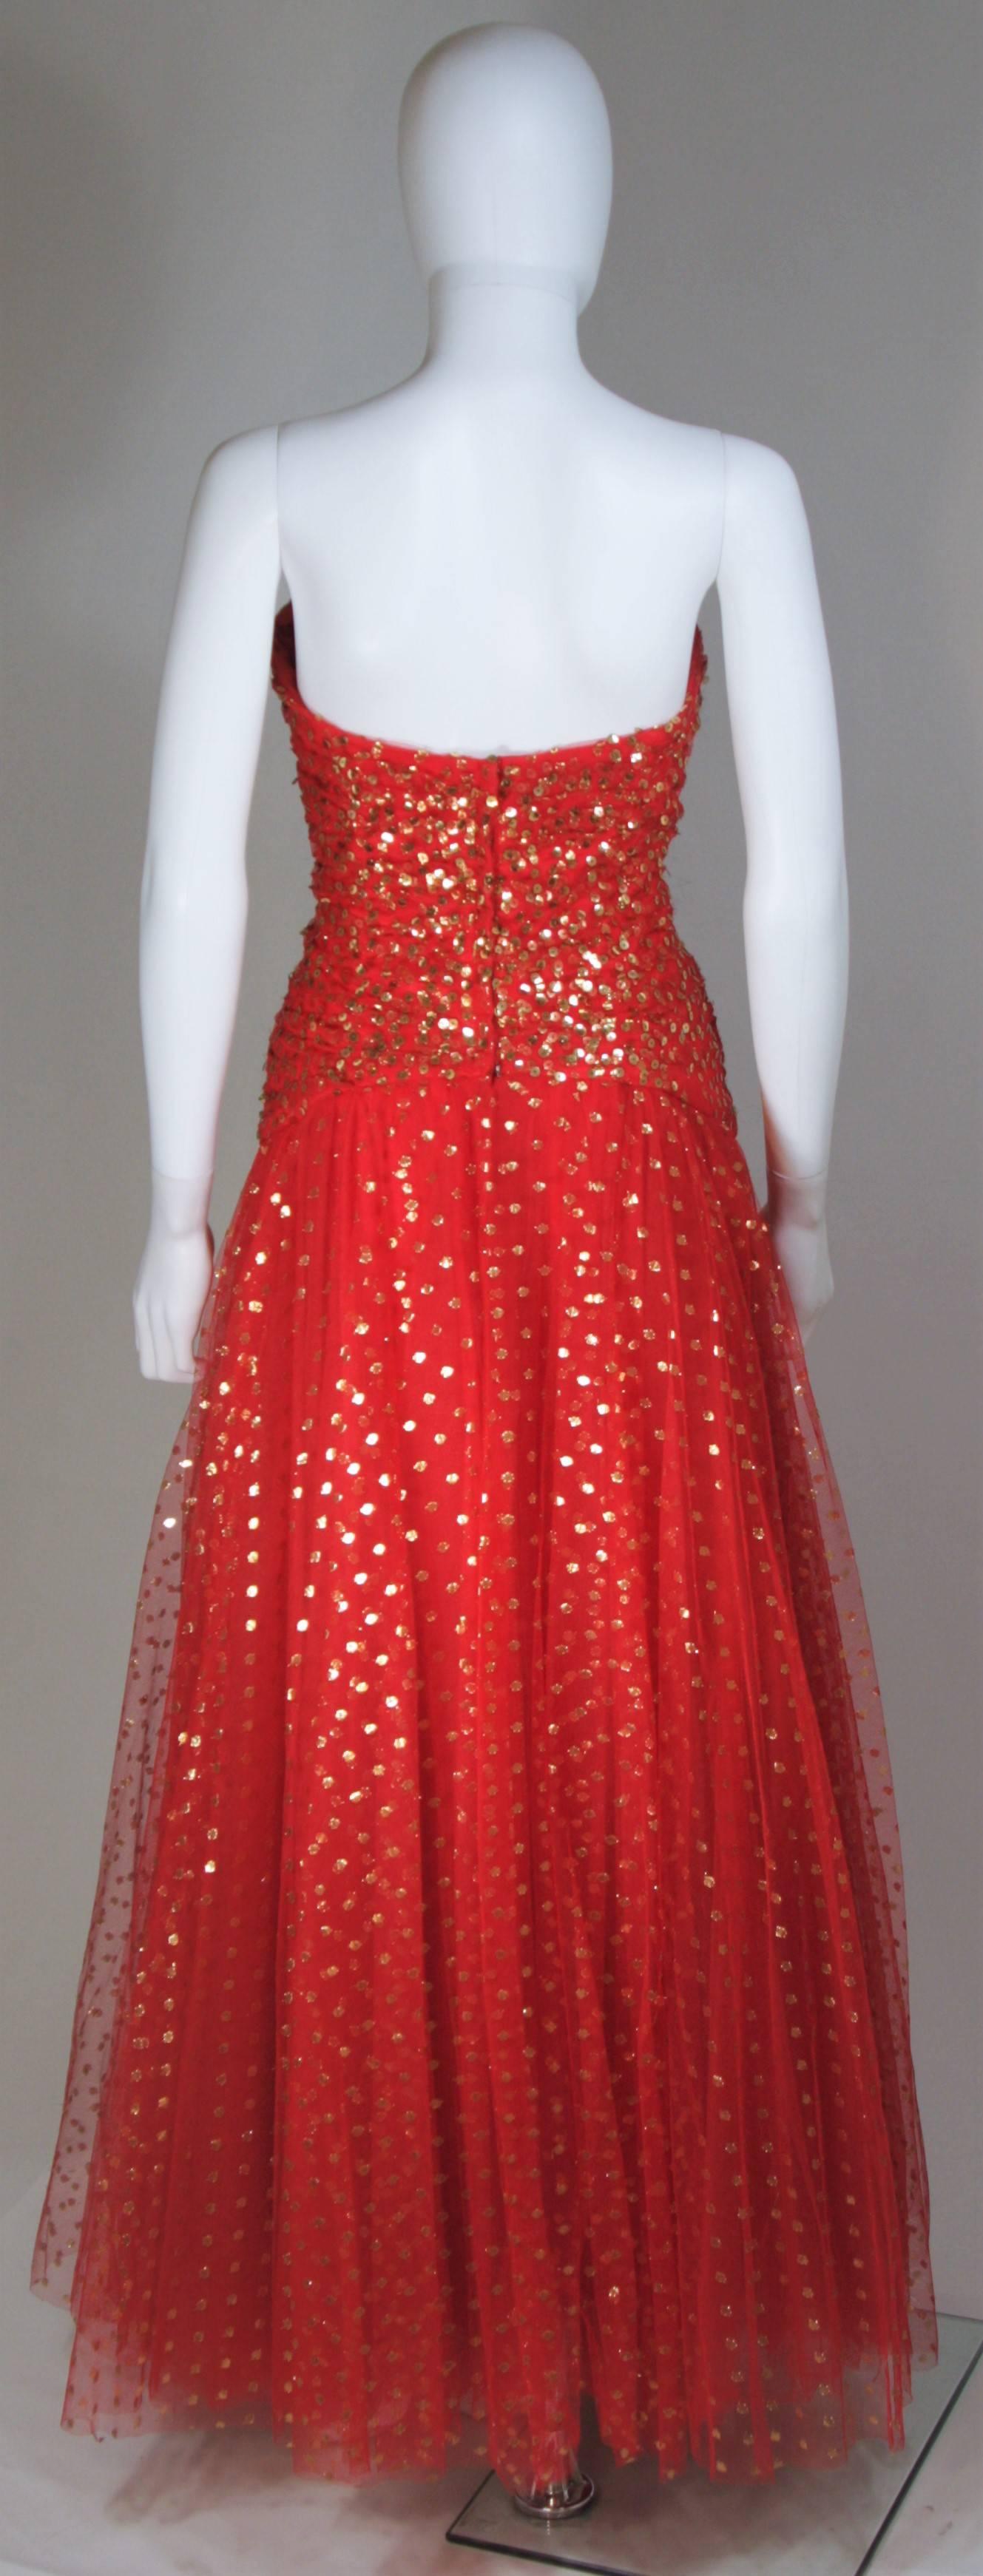 Women's or Men's VICTOR COSTA Red Layered Mesh Gown with Gold Sequins Size 8 For Sale